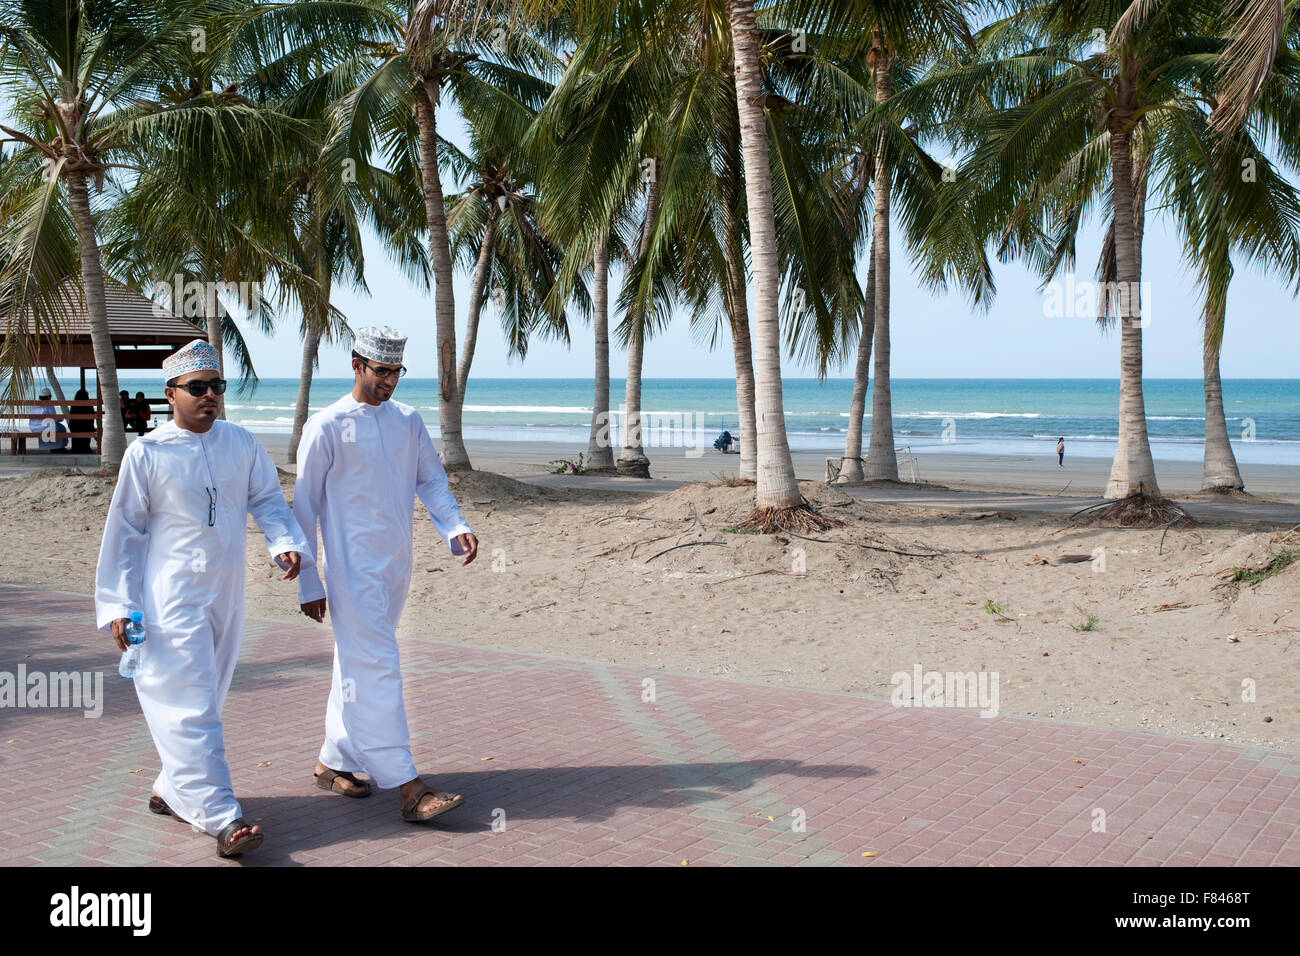 Two Omani men walking along the Qurum beach promenade in Muscat, the capital of the Sultanate of Oman. Stock Photo